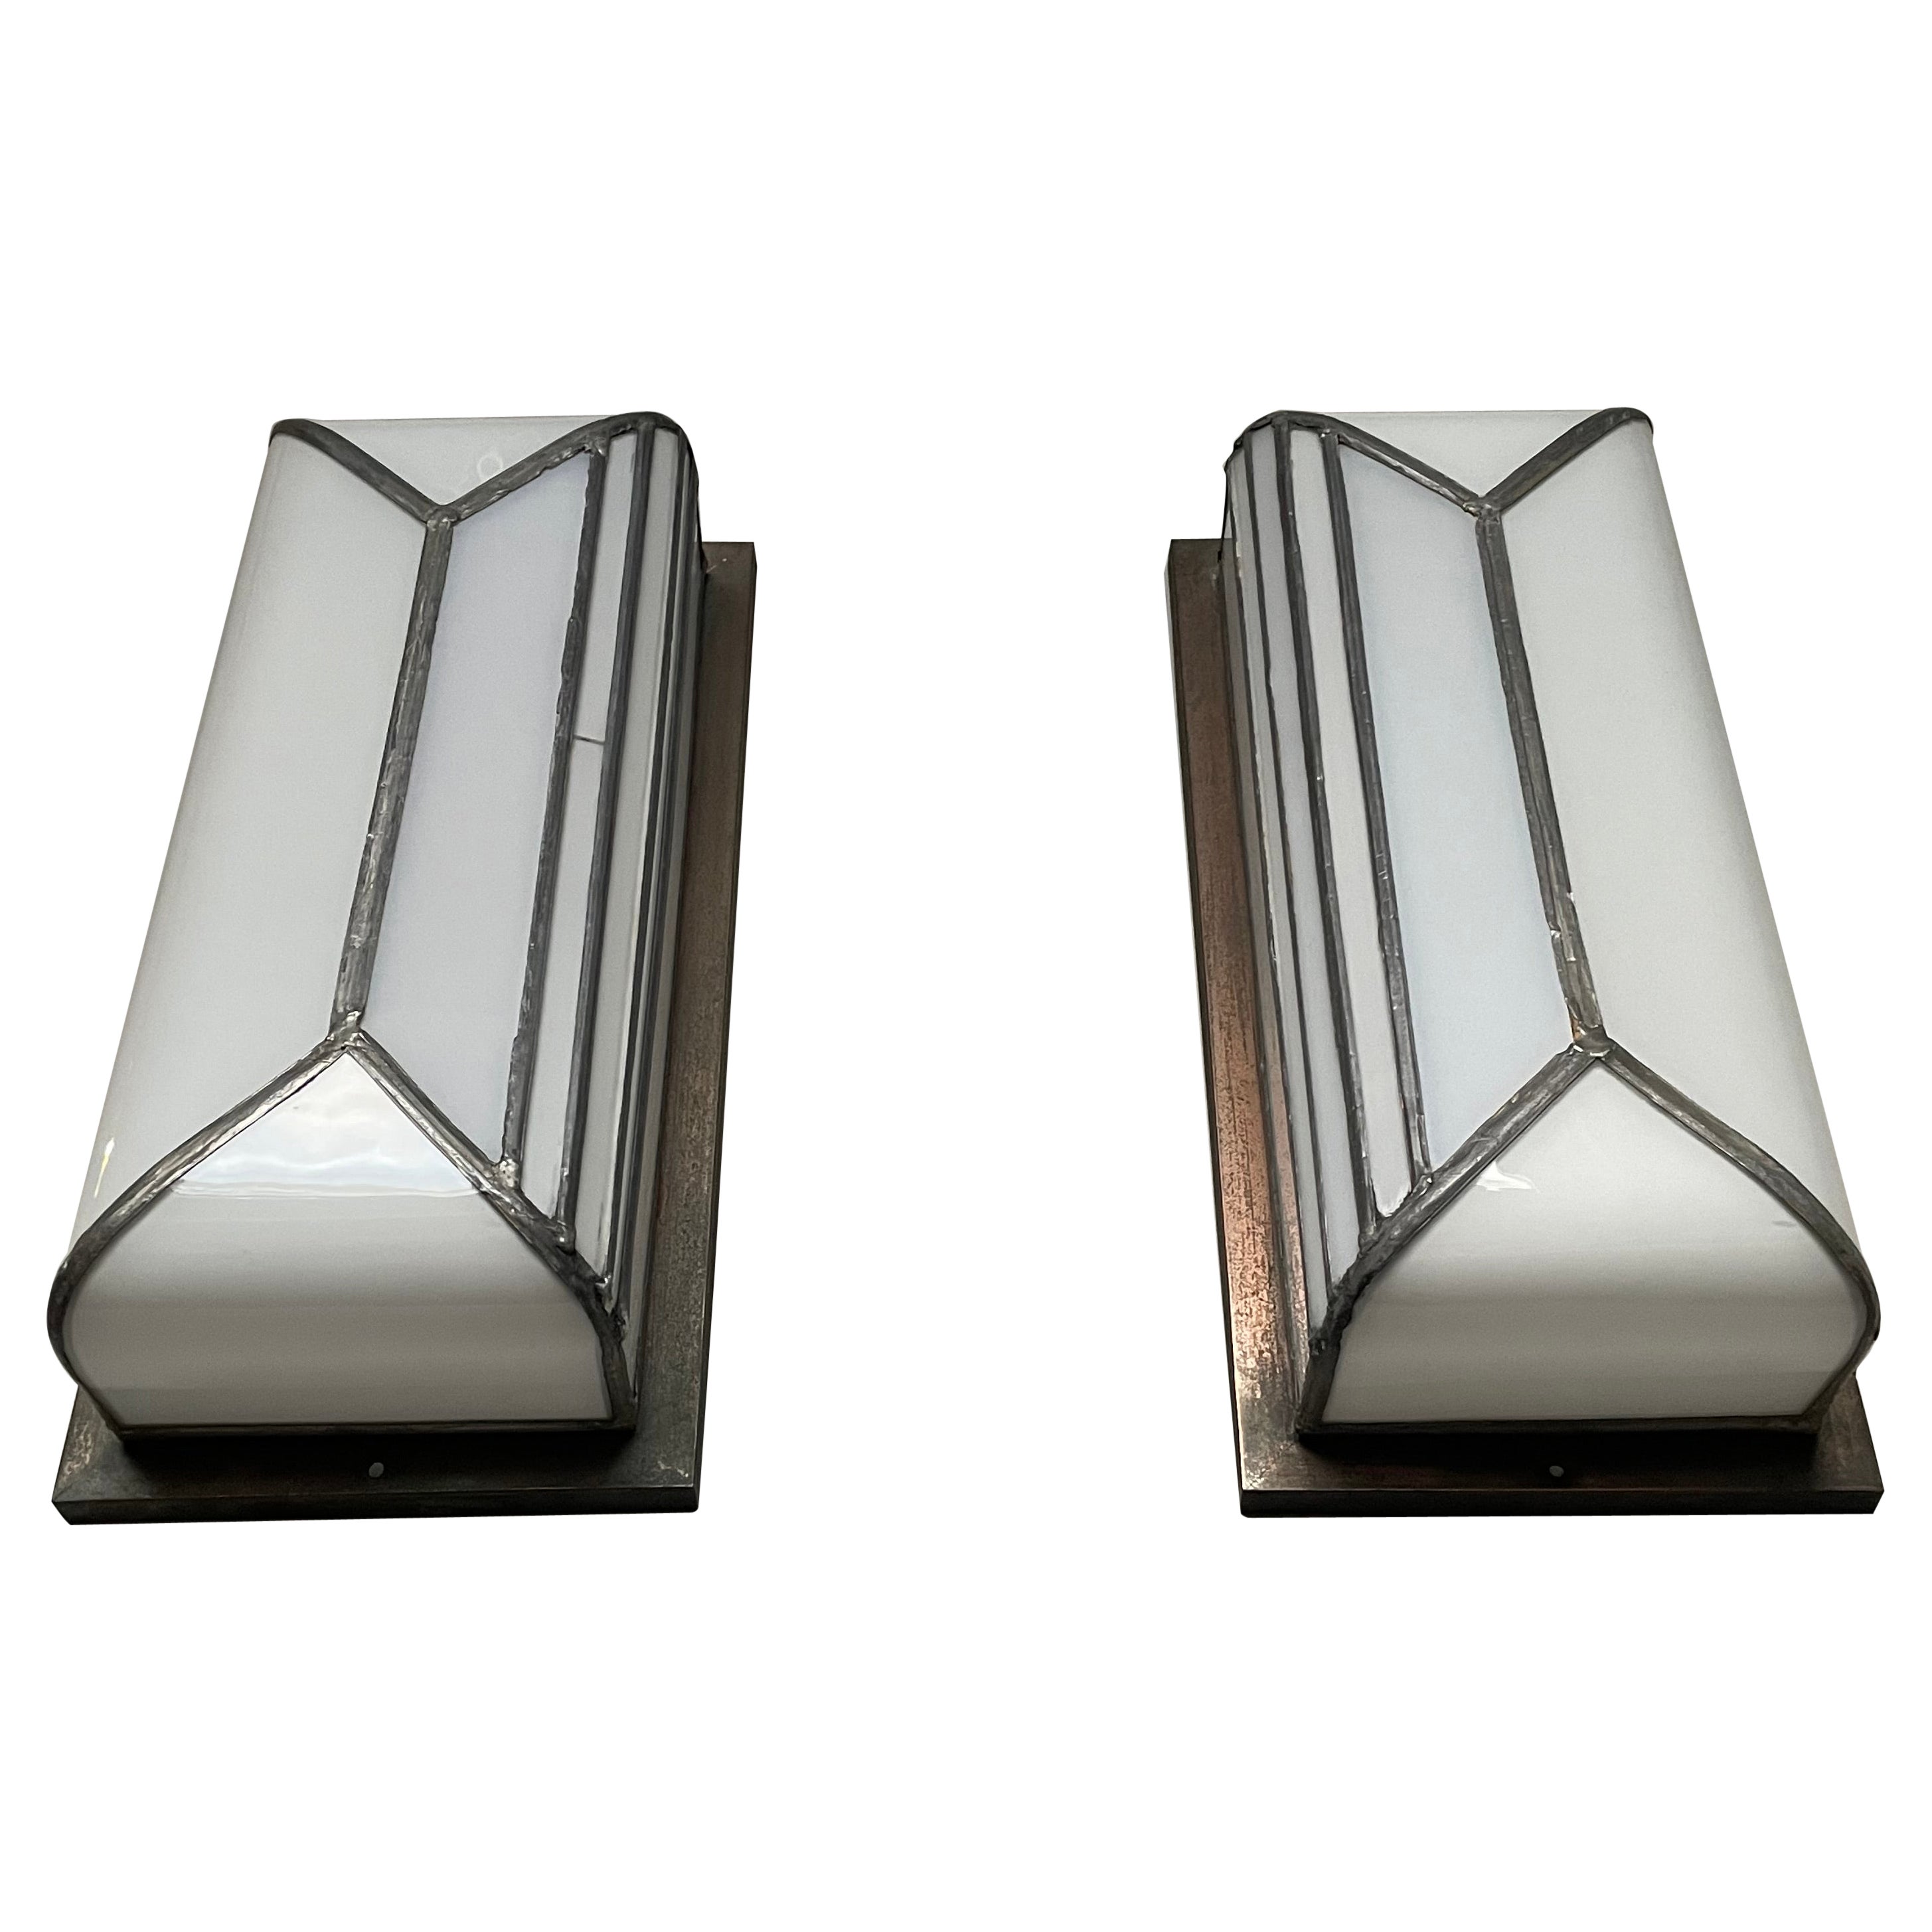 Rare & Great Pair of Art Deco Opaline Glass Flush Mounts or Wall Sconces 1920s  For Sale